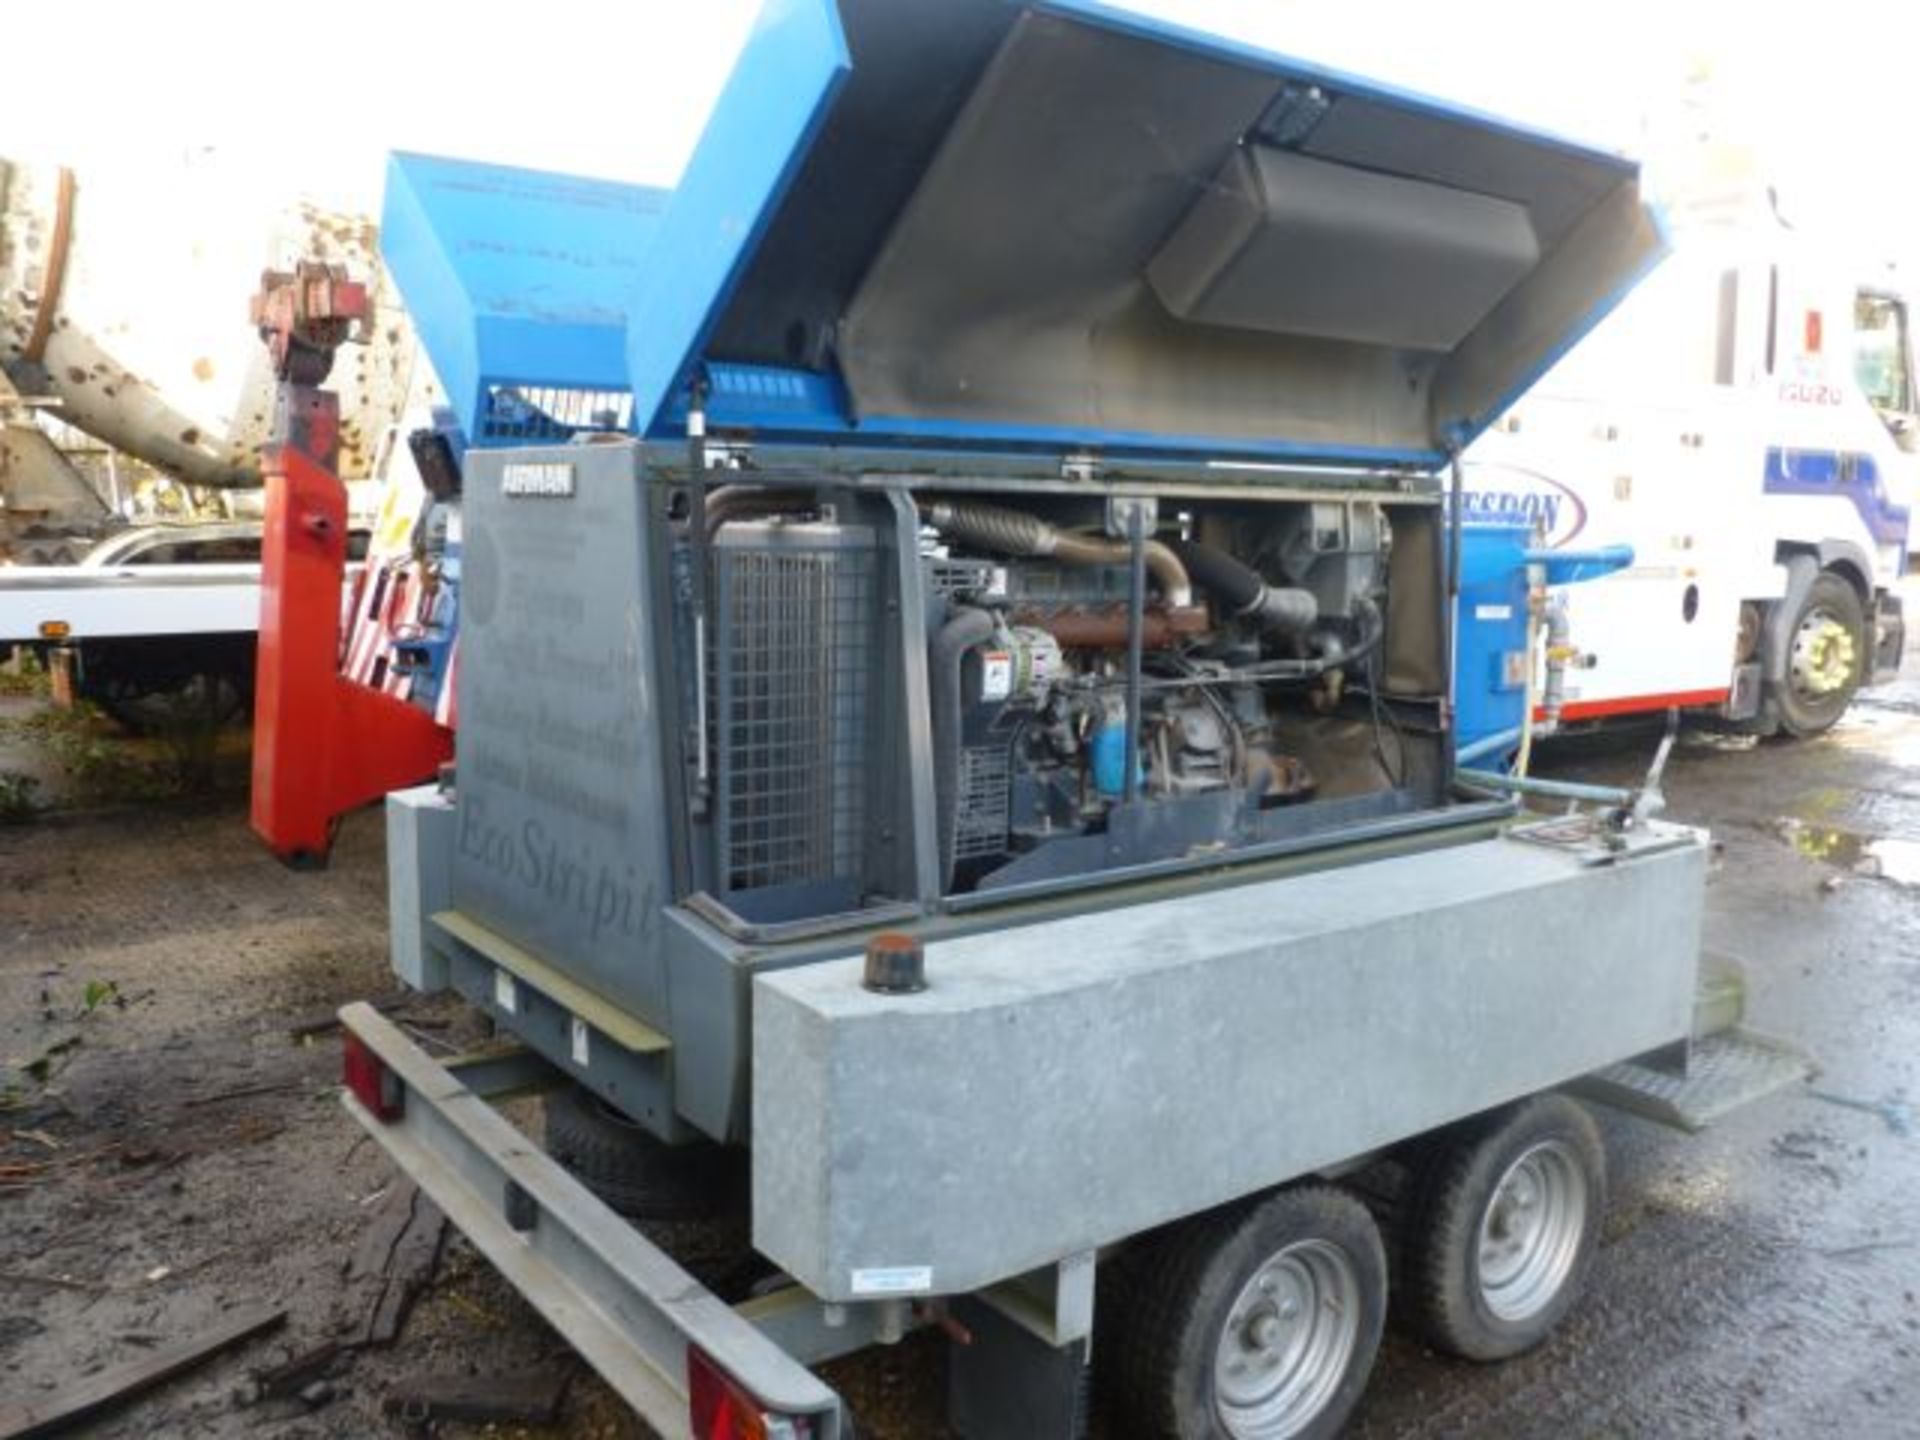 Airman PDS 1855 Portable Compressor - Mounted on 2 Axle Drawbar Trailer - Nissan 4 cyl Diesel Engine - Image 2 of 5